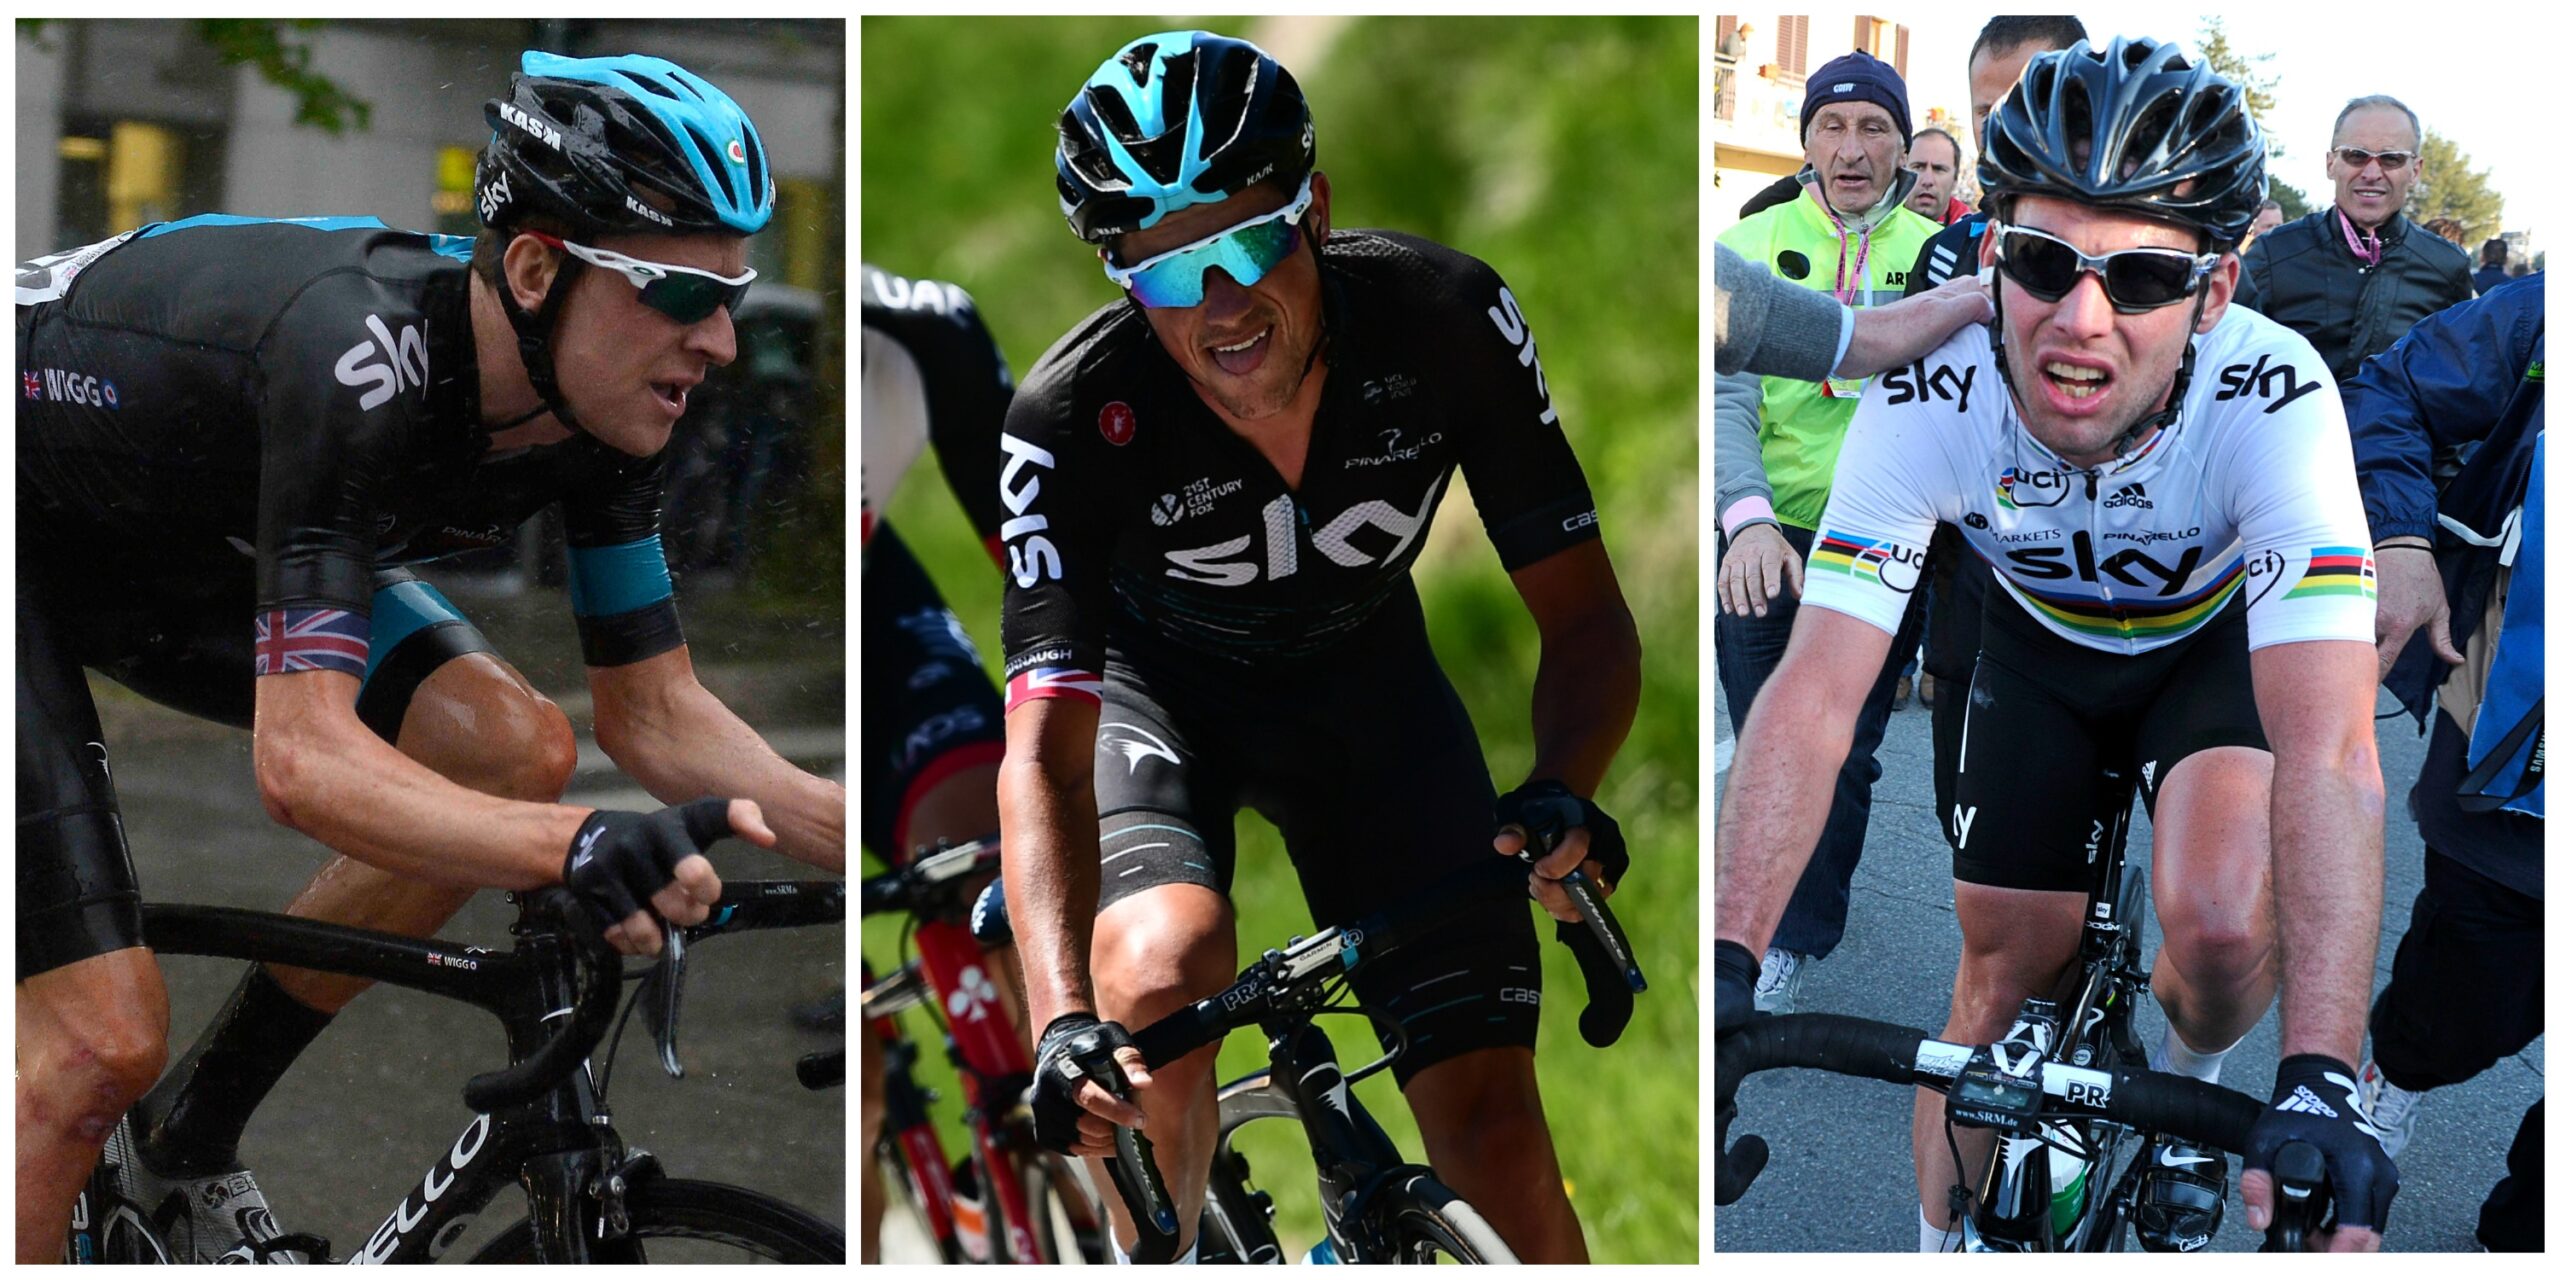 Kennaugh critiques Wiggins, Froome, Cavendish as leaders at Team Sky | “A bit weird”